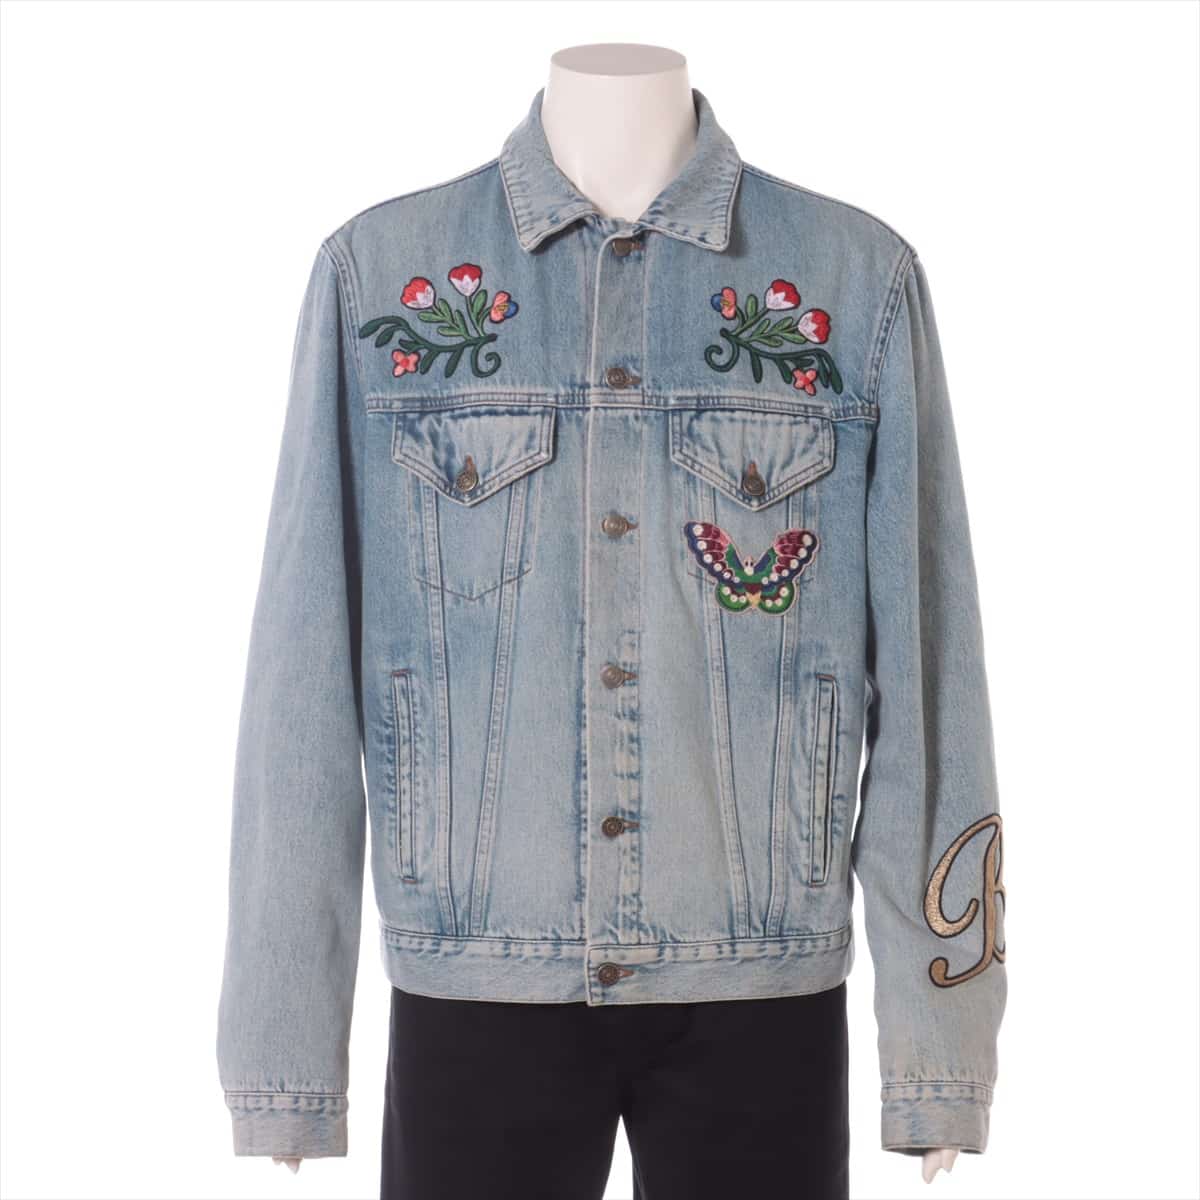 Gucci 17 years Cotton Denim jacket 52 Men's Blue  458515 DIY Embroidery batting With name